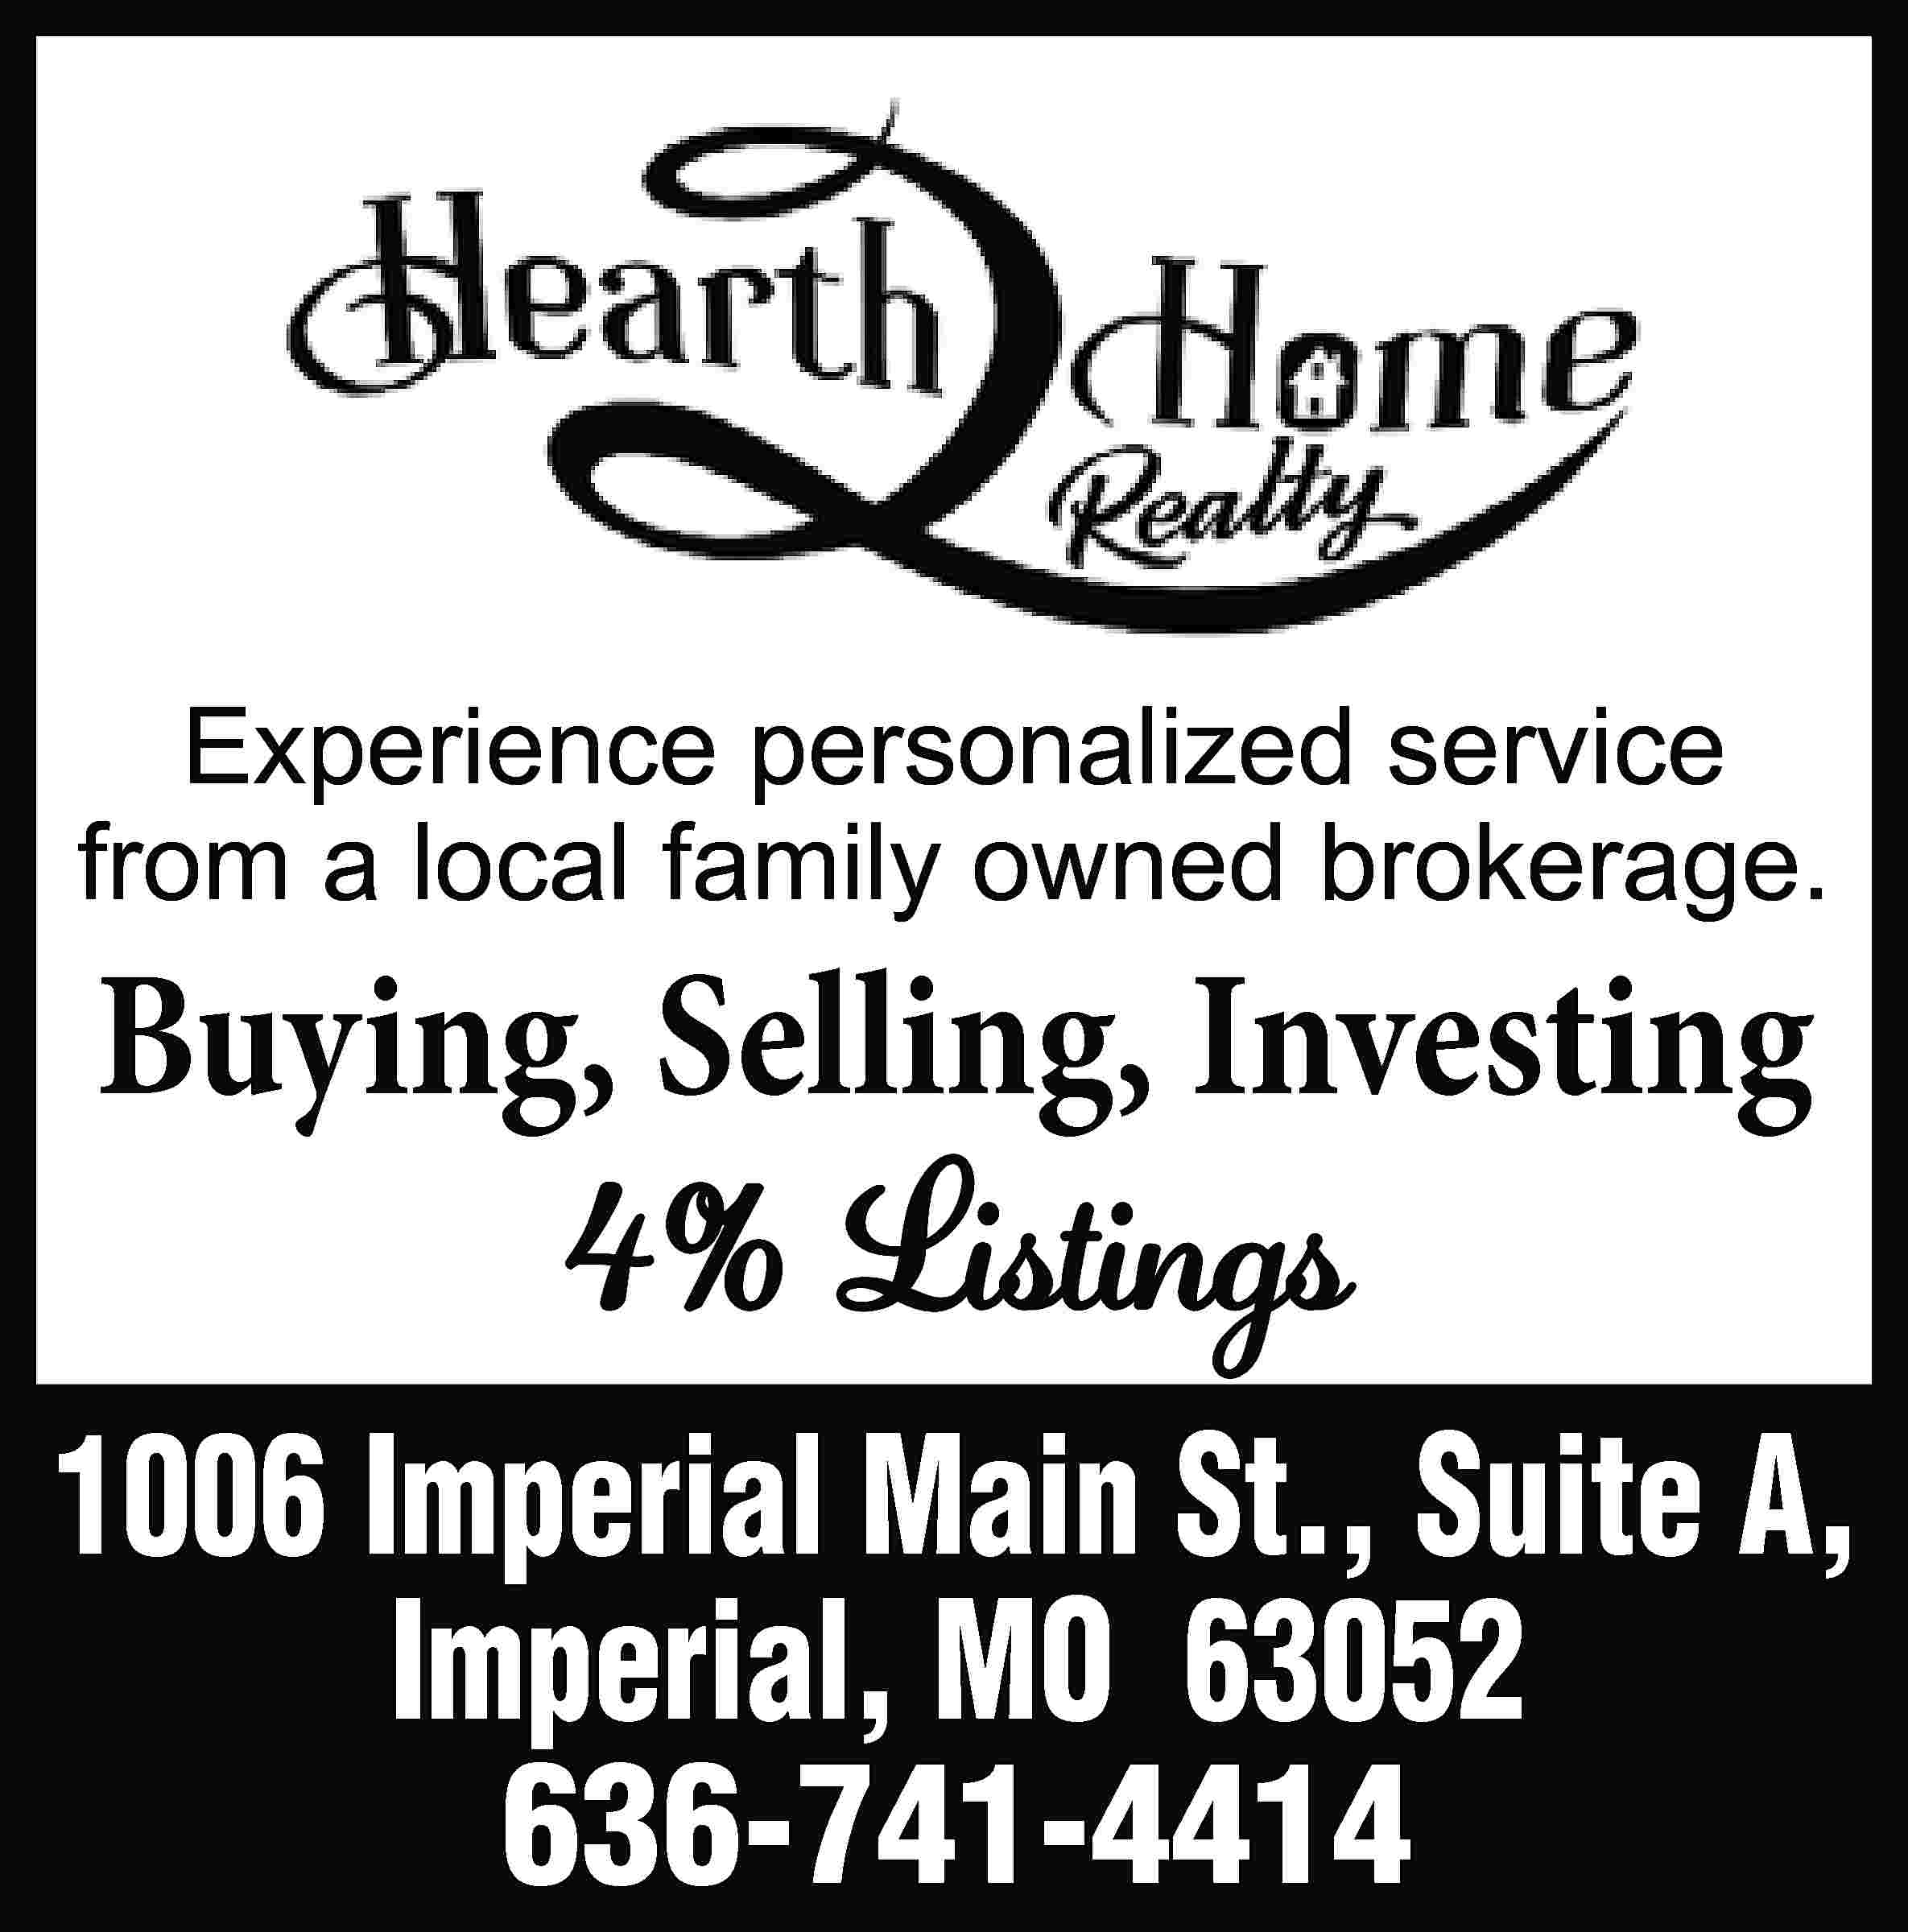 Experience personalized service from a  Experience personalized service from a local family owned brokerage. Buying, Selling, Investing 4% Listings 1006 Imperial Main St., Suite A, Imperial, MO 63052 636-741-4414